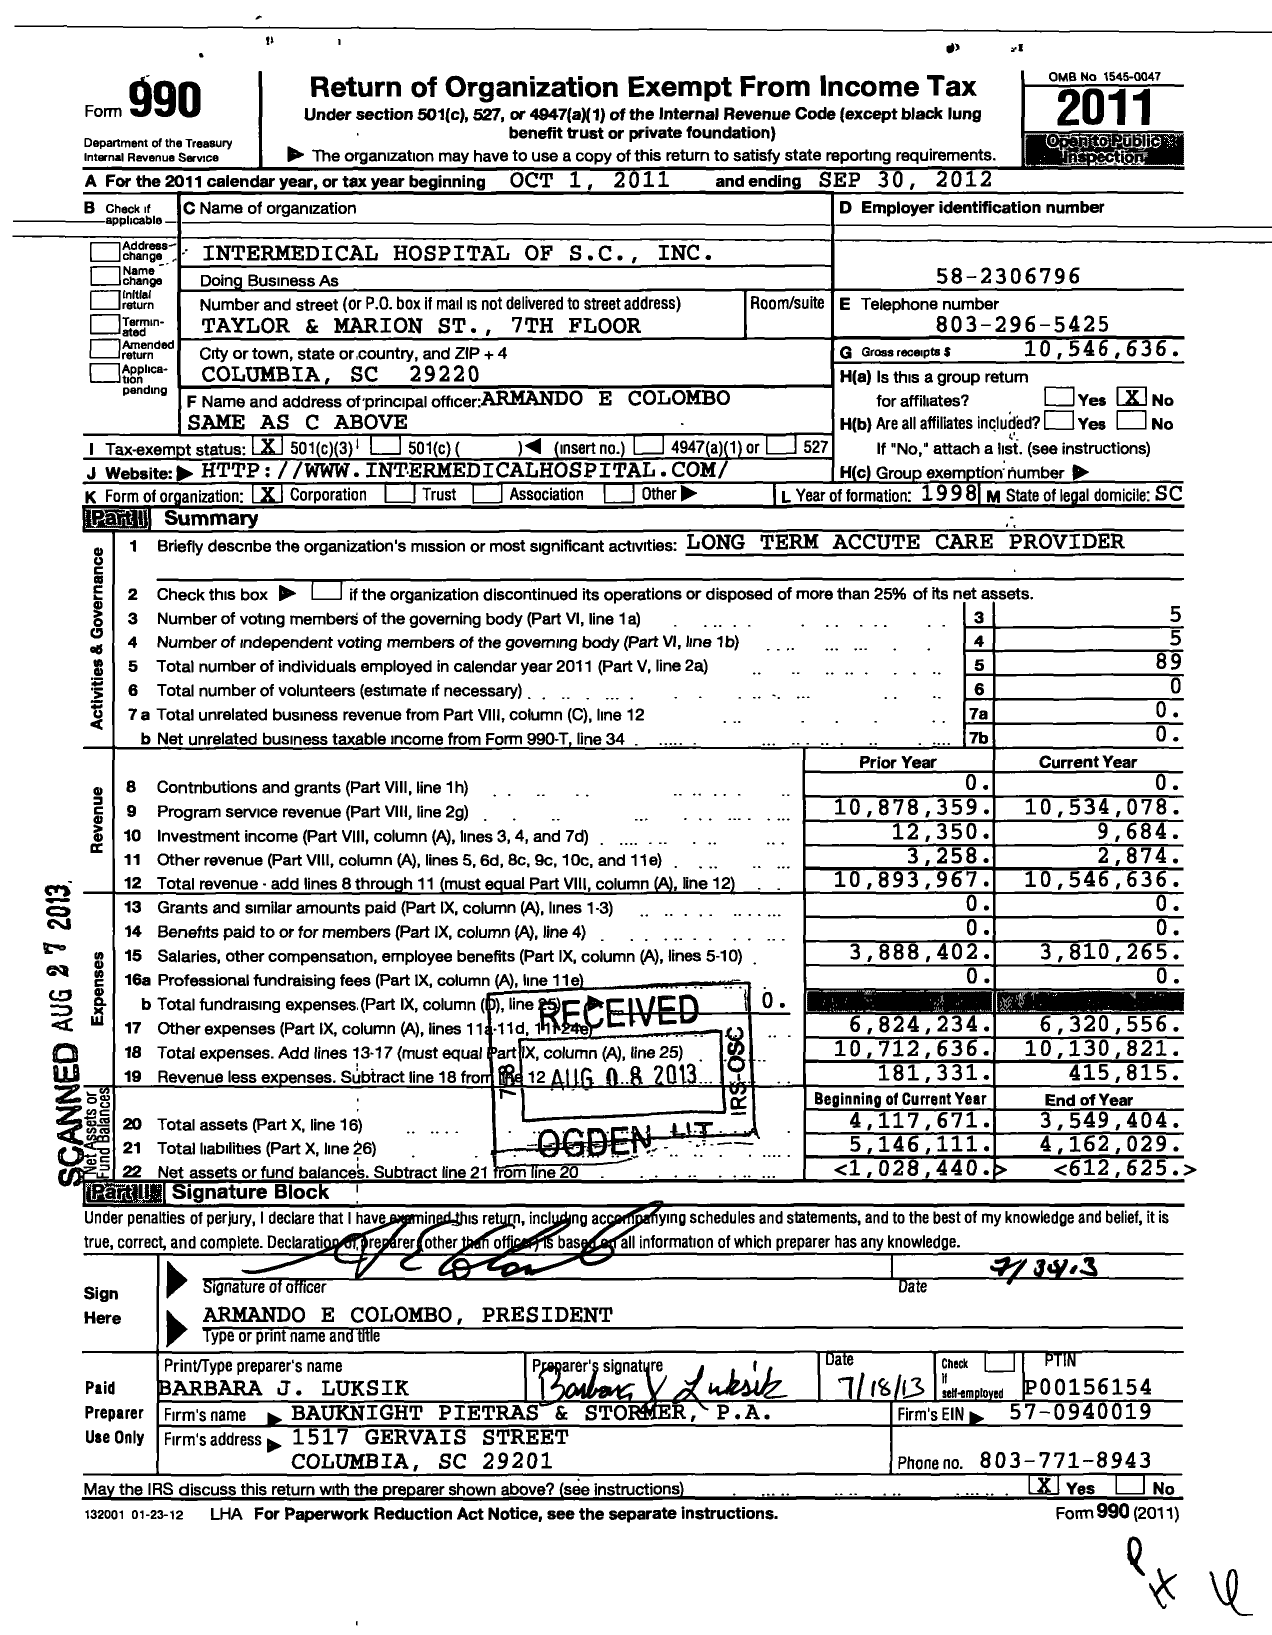 Image of first page of 2011 Form 990 for Intermedical Hospital of SC